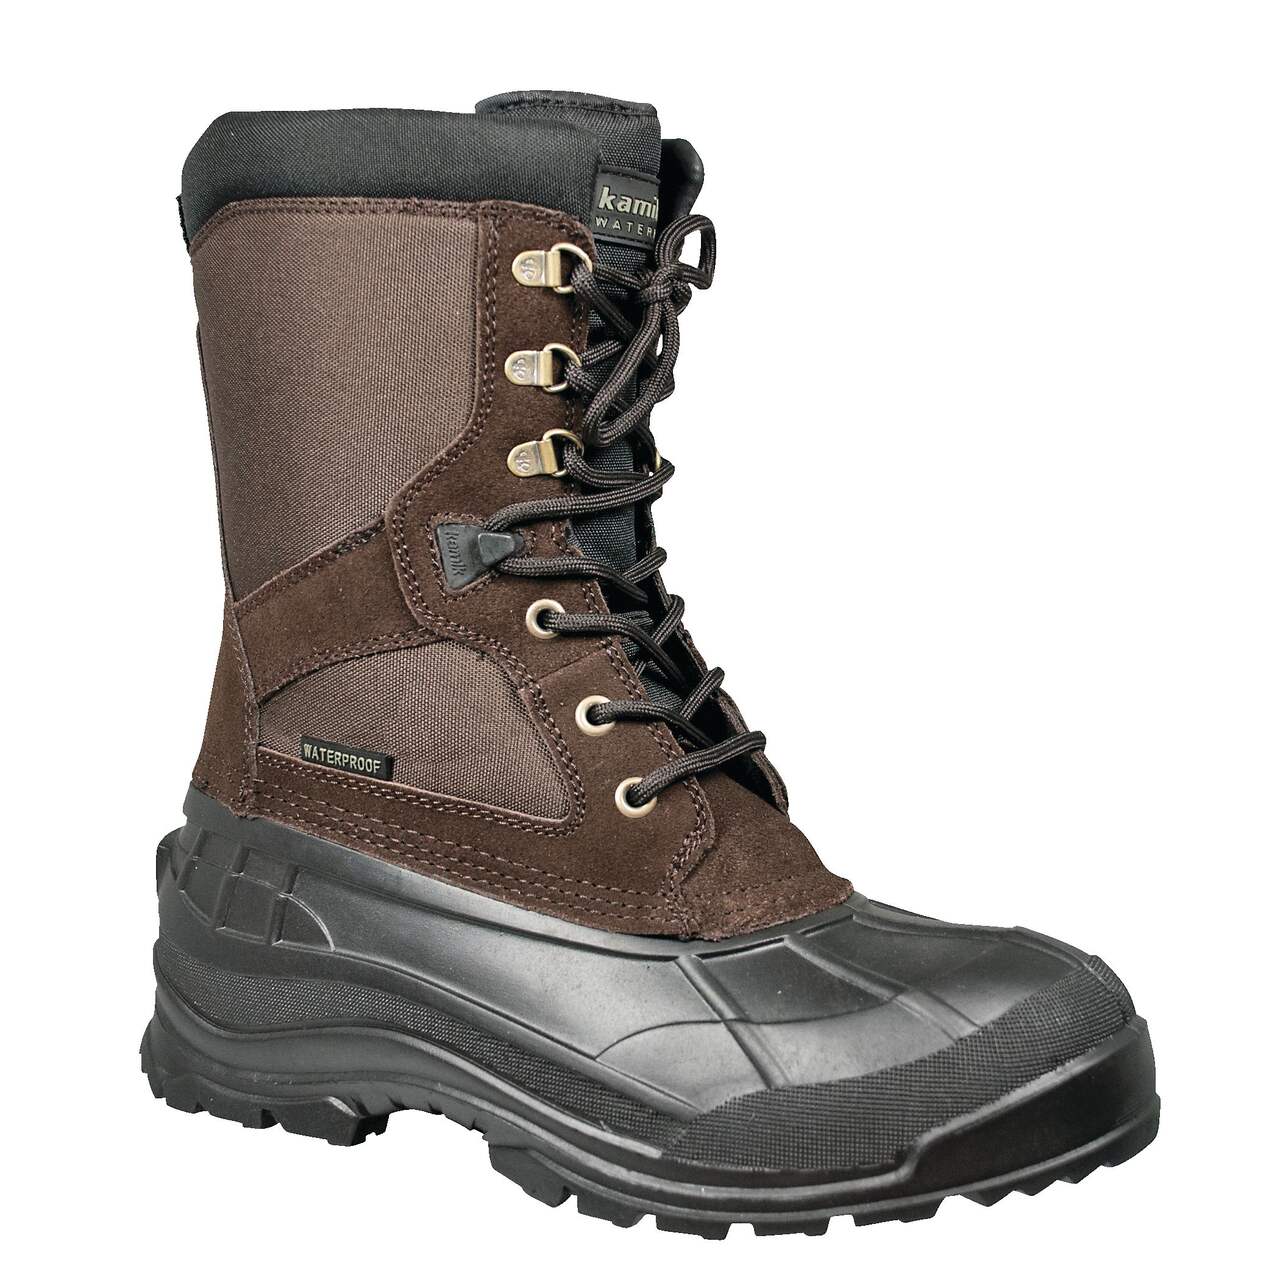 https://media-www.canadiantire.ca/product/playing/footwear-apparel/winter-footwear-apparel/0870962/kamik-men-s-nelson-winter-boot-size-8-e3560df9-cc59-489f-adc5-c0995565fec1-jpgrendition.jpg?imdensity=1&imwidth=640&impolicy=mZoom